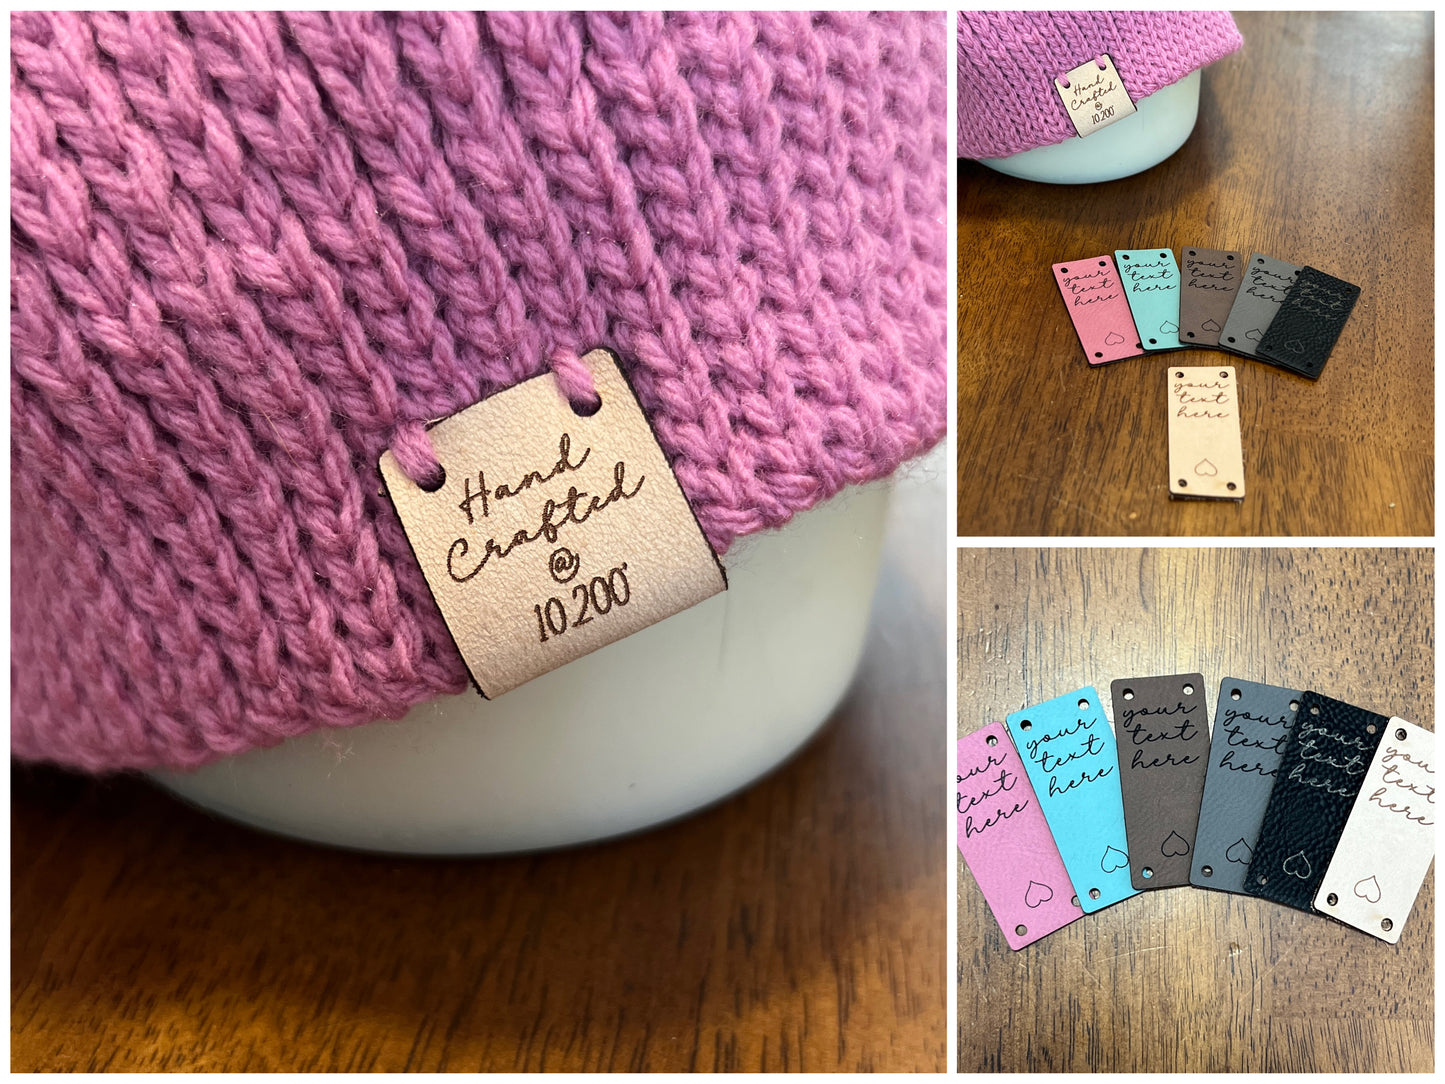 Genuine and Faux Leather Tags for Handmade Items